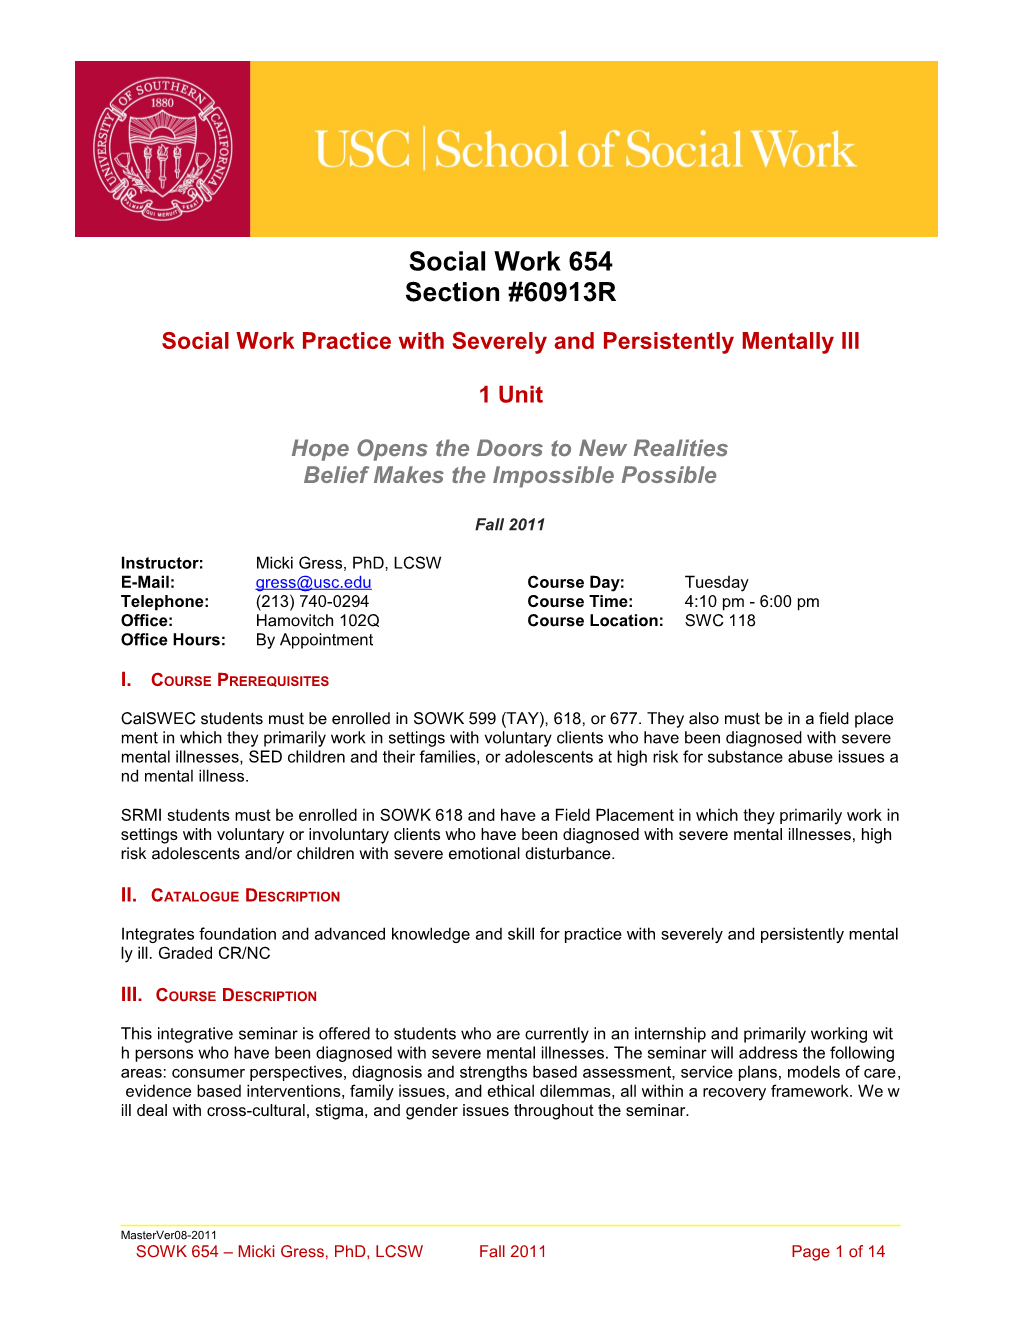 School of Social Work Syllabus Template Guide s15